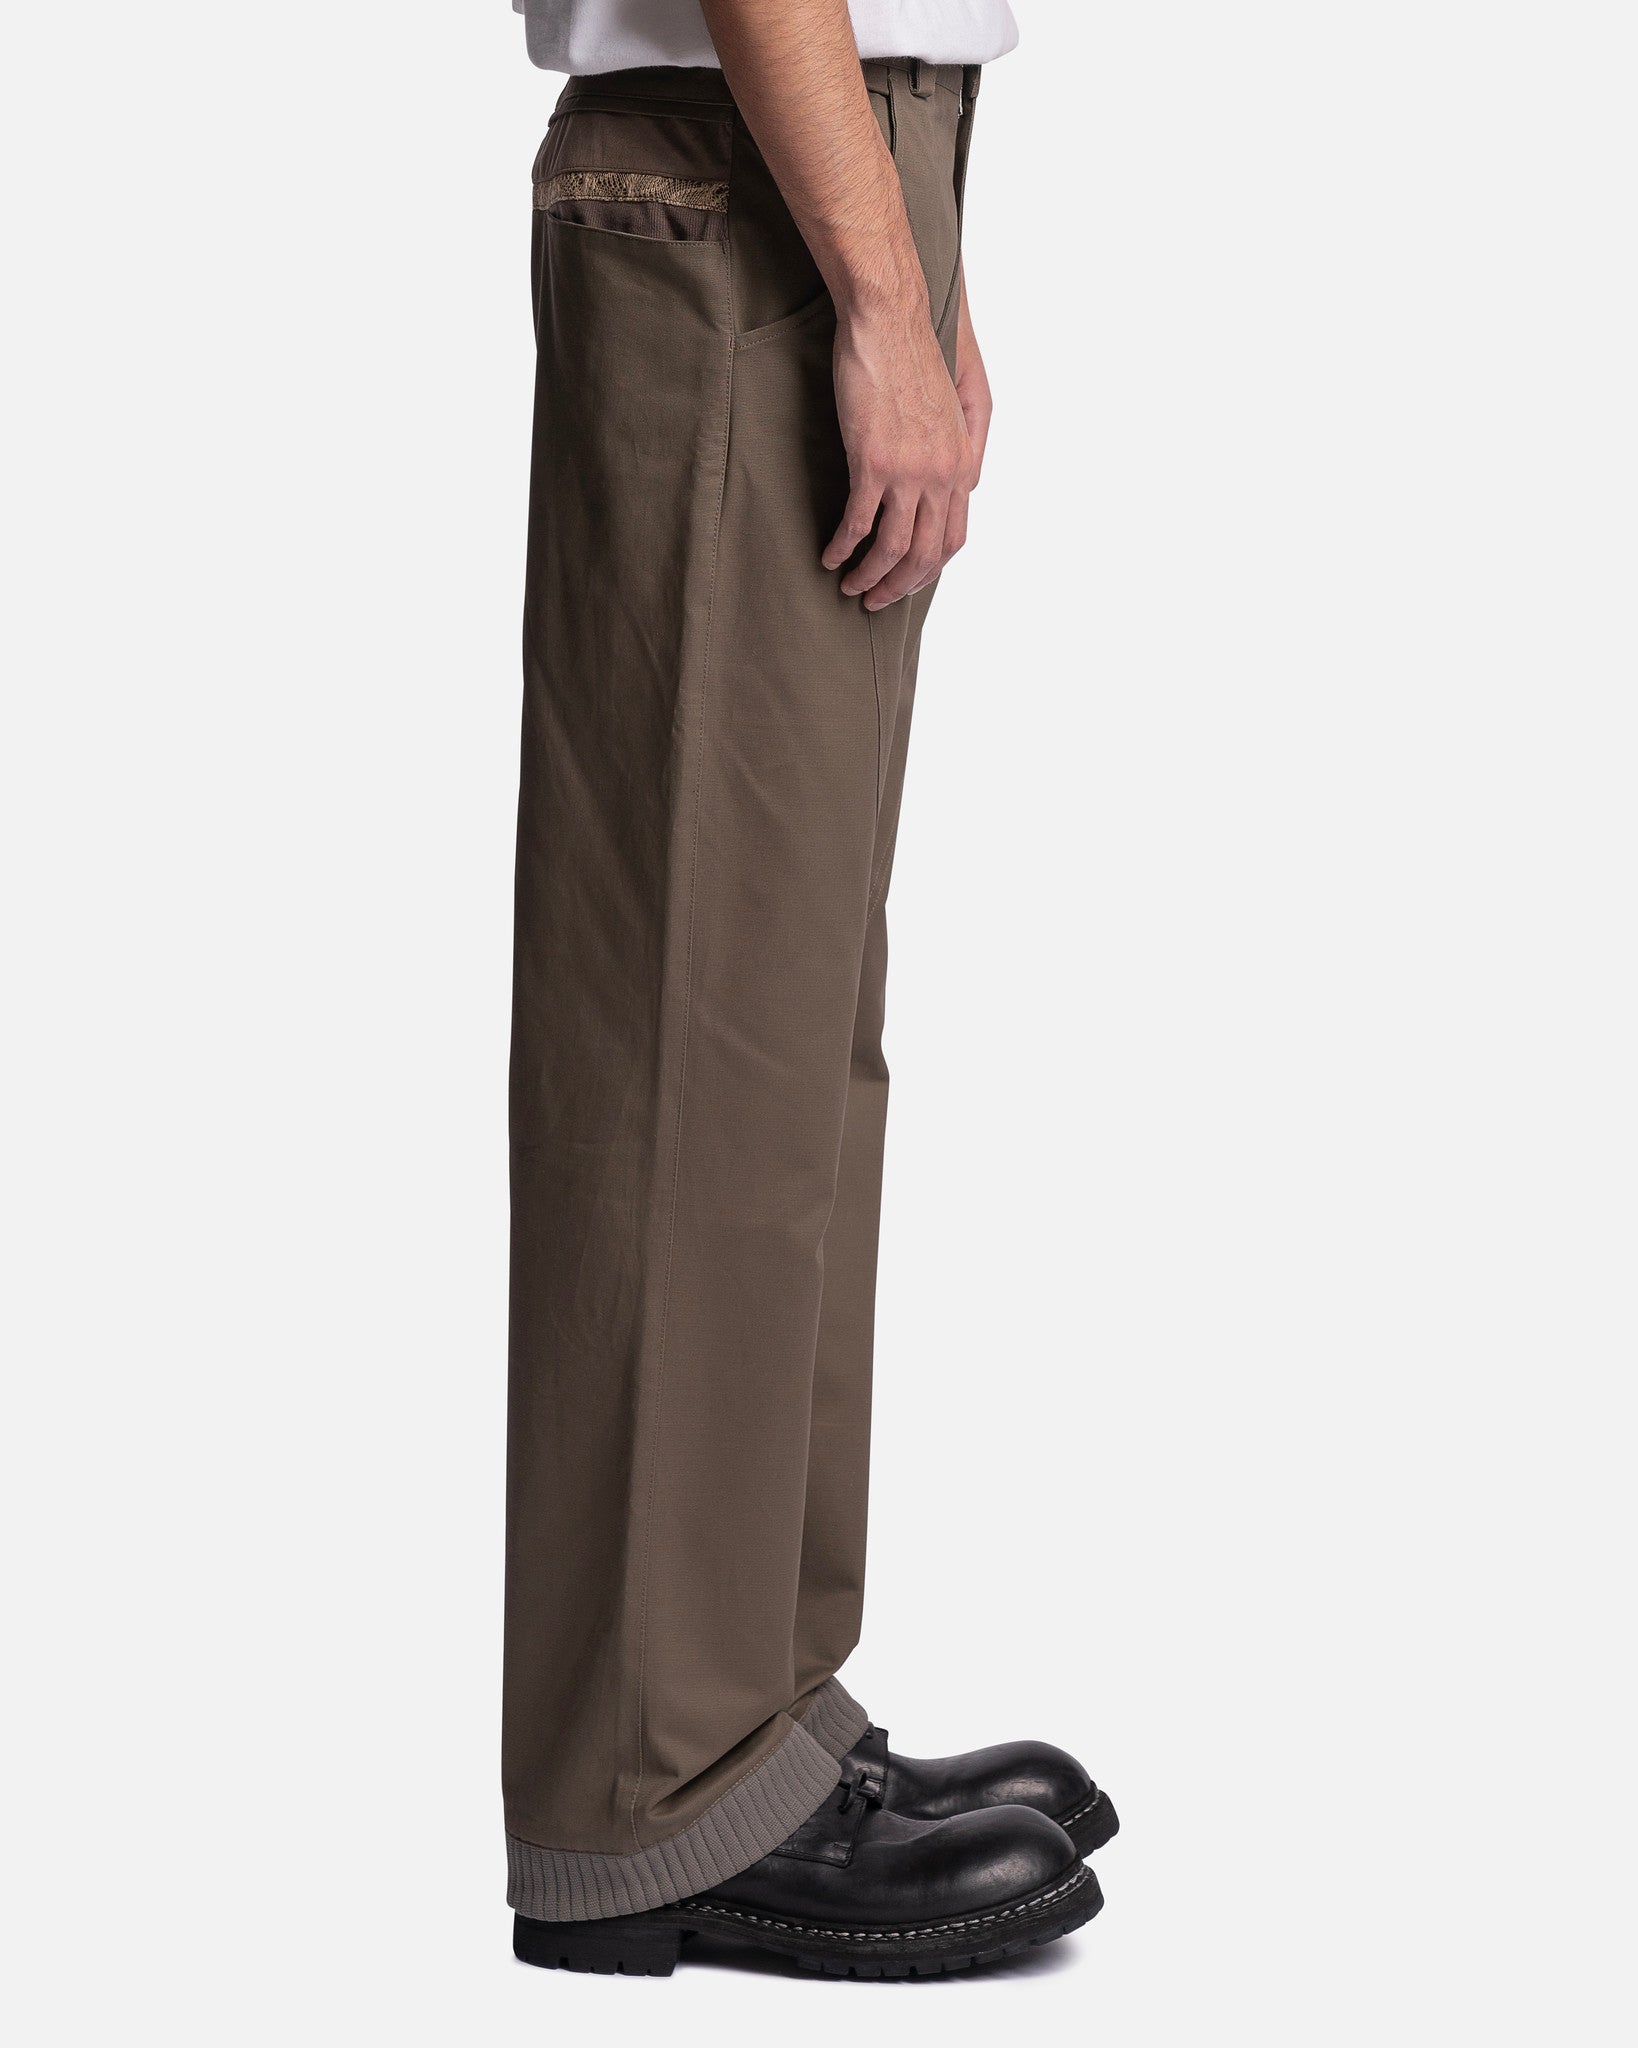 EP.3 02 Trousers in Brown